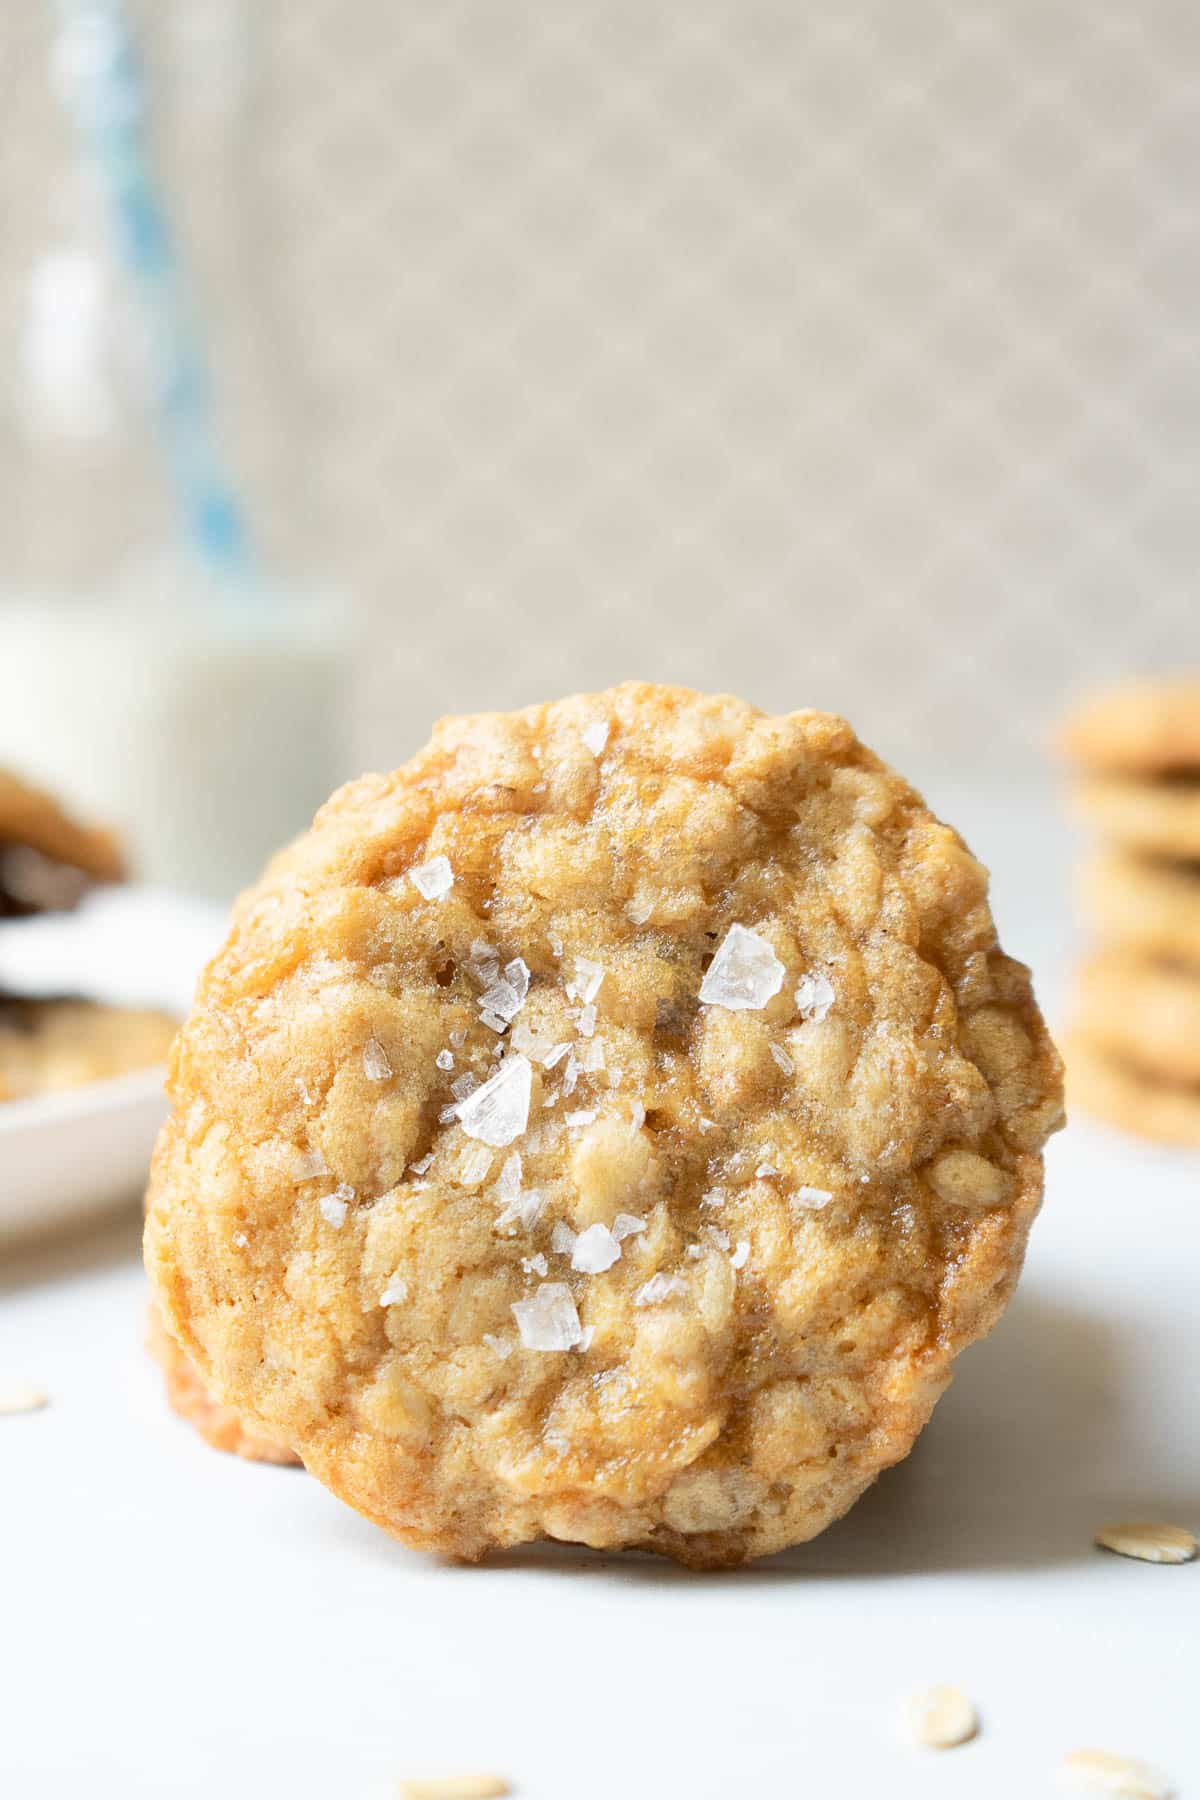 Up close photo of an oatmeal cookie sprinkled with flakey salt.